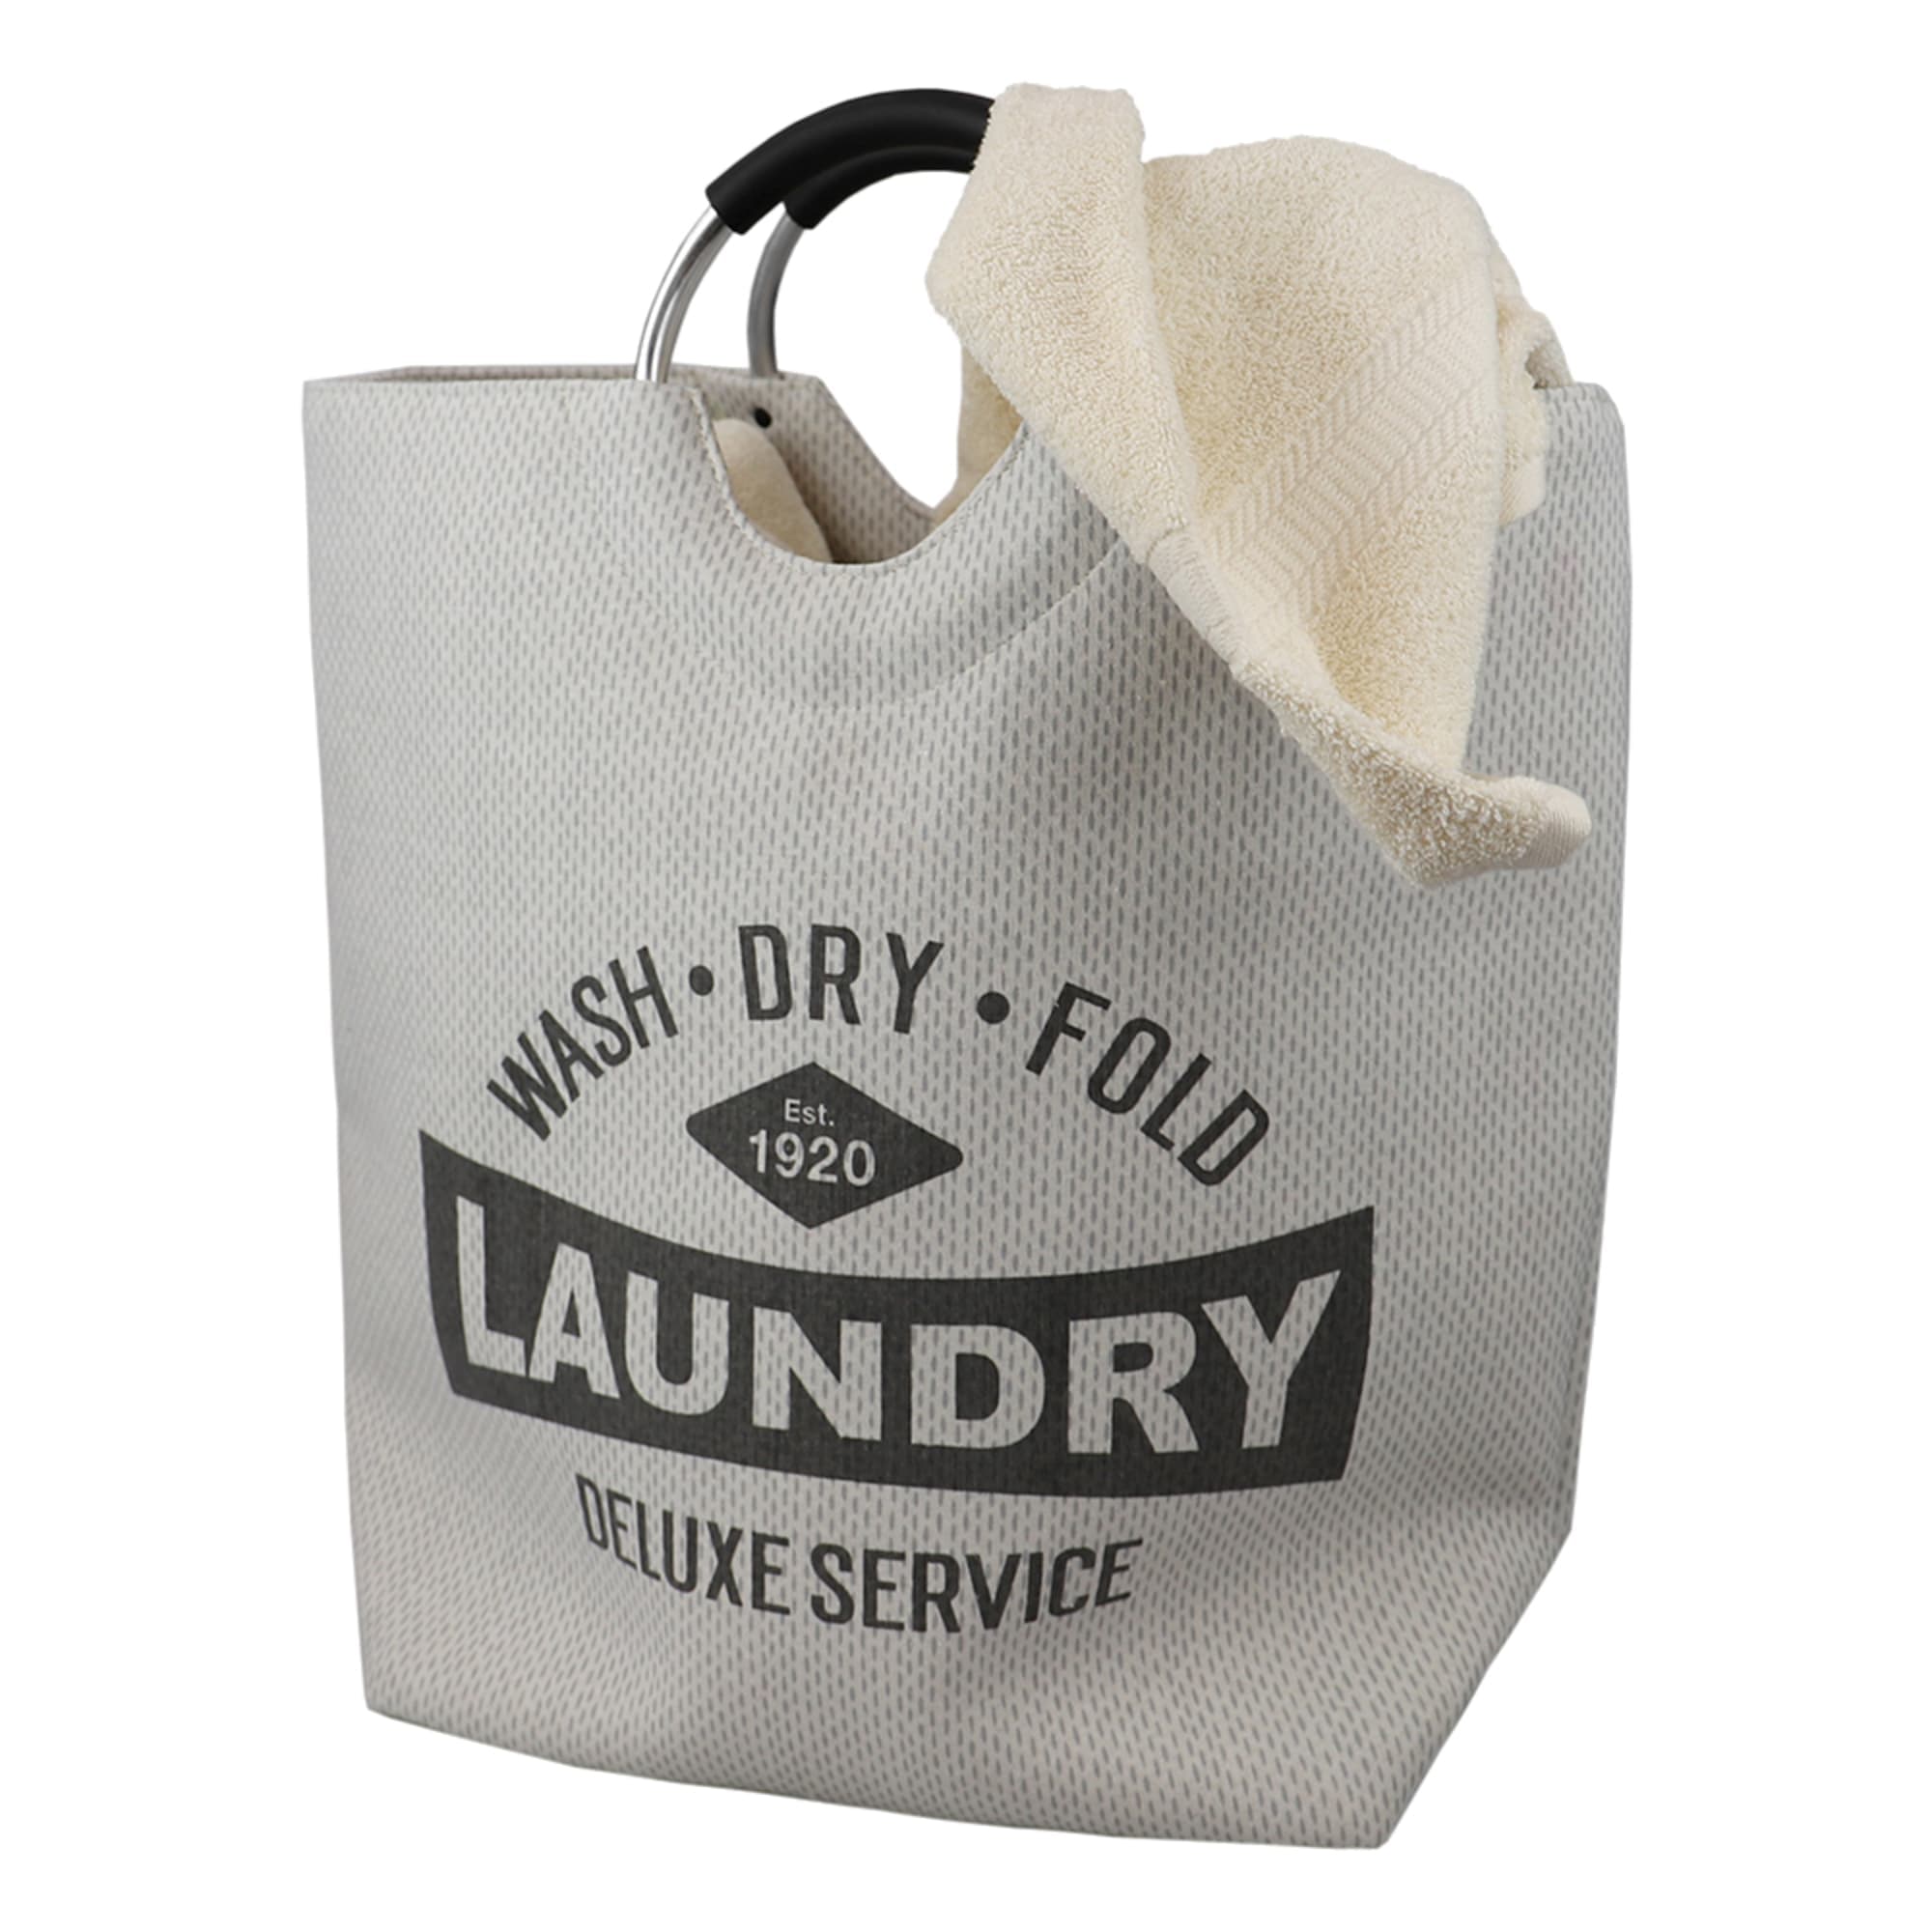 Home Basics Deluxe Service Wash Dry Fold Canvas Laundry Tote with Soft Grip Padded Aluminum Handles, Grey $12 EACH, CASE PACK OF 6